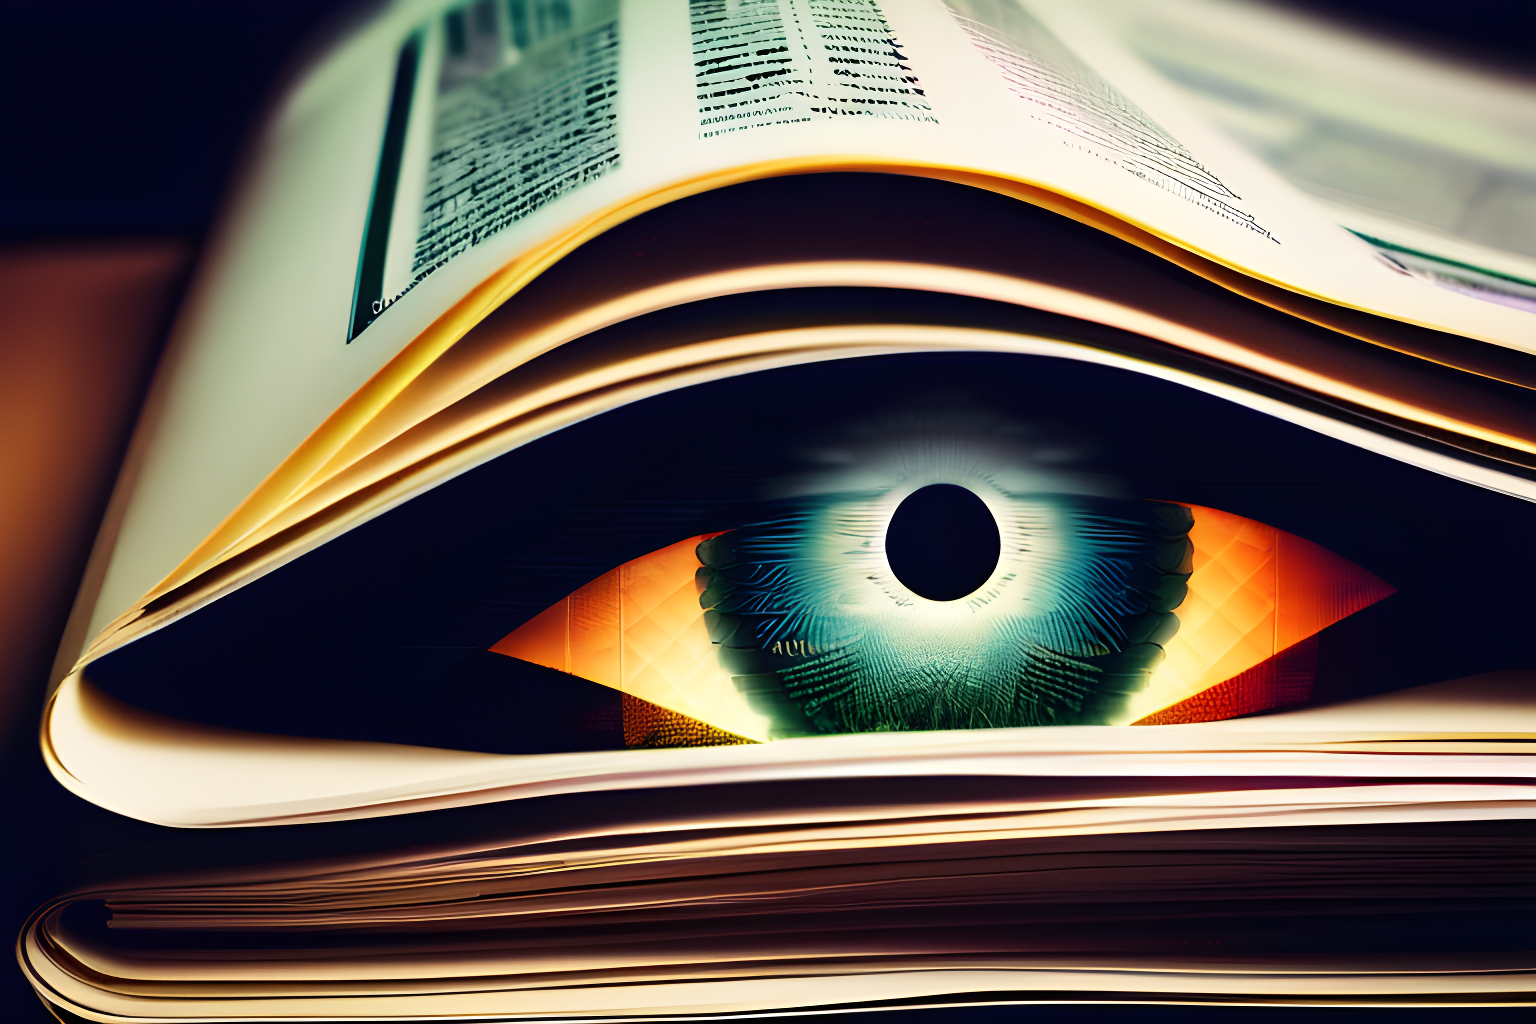 All seeing eye looking through a stack of office documents